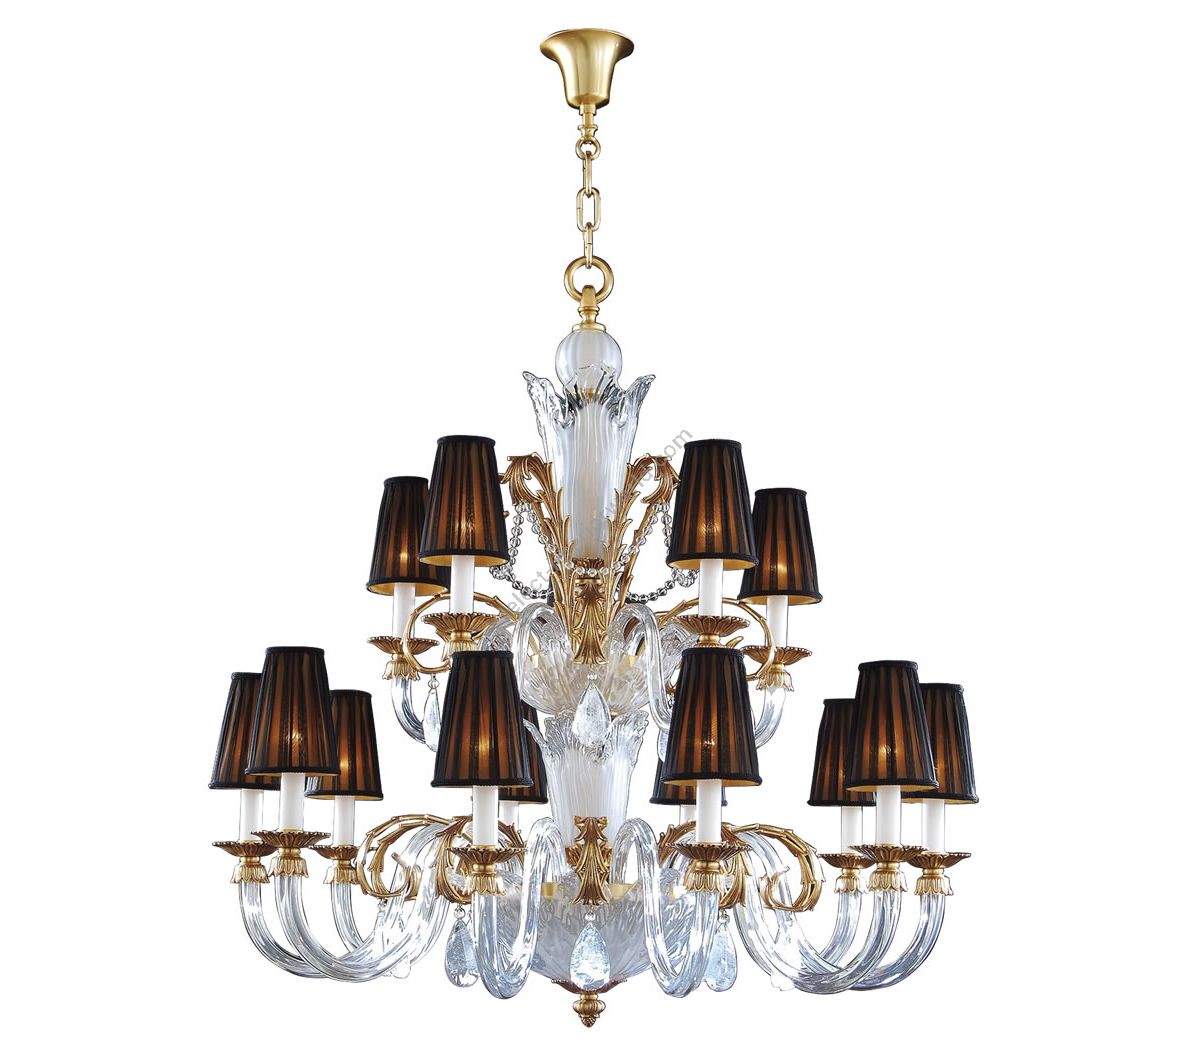 Mariner / Luxury Classic Chandelier 10+5 arms Clear Murano Glass / 19813